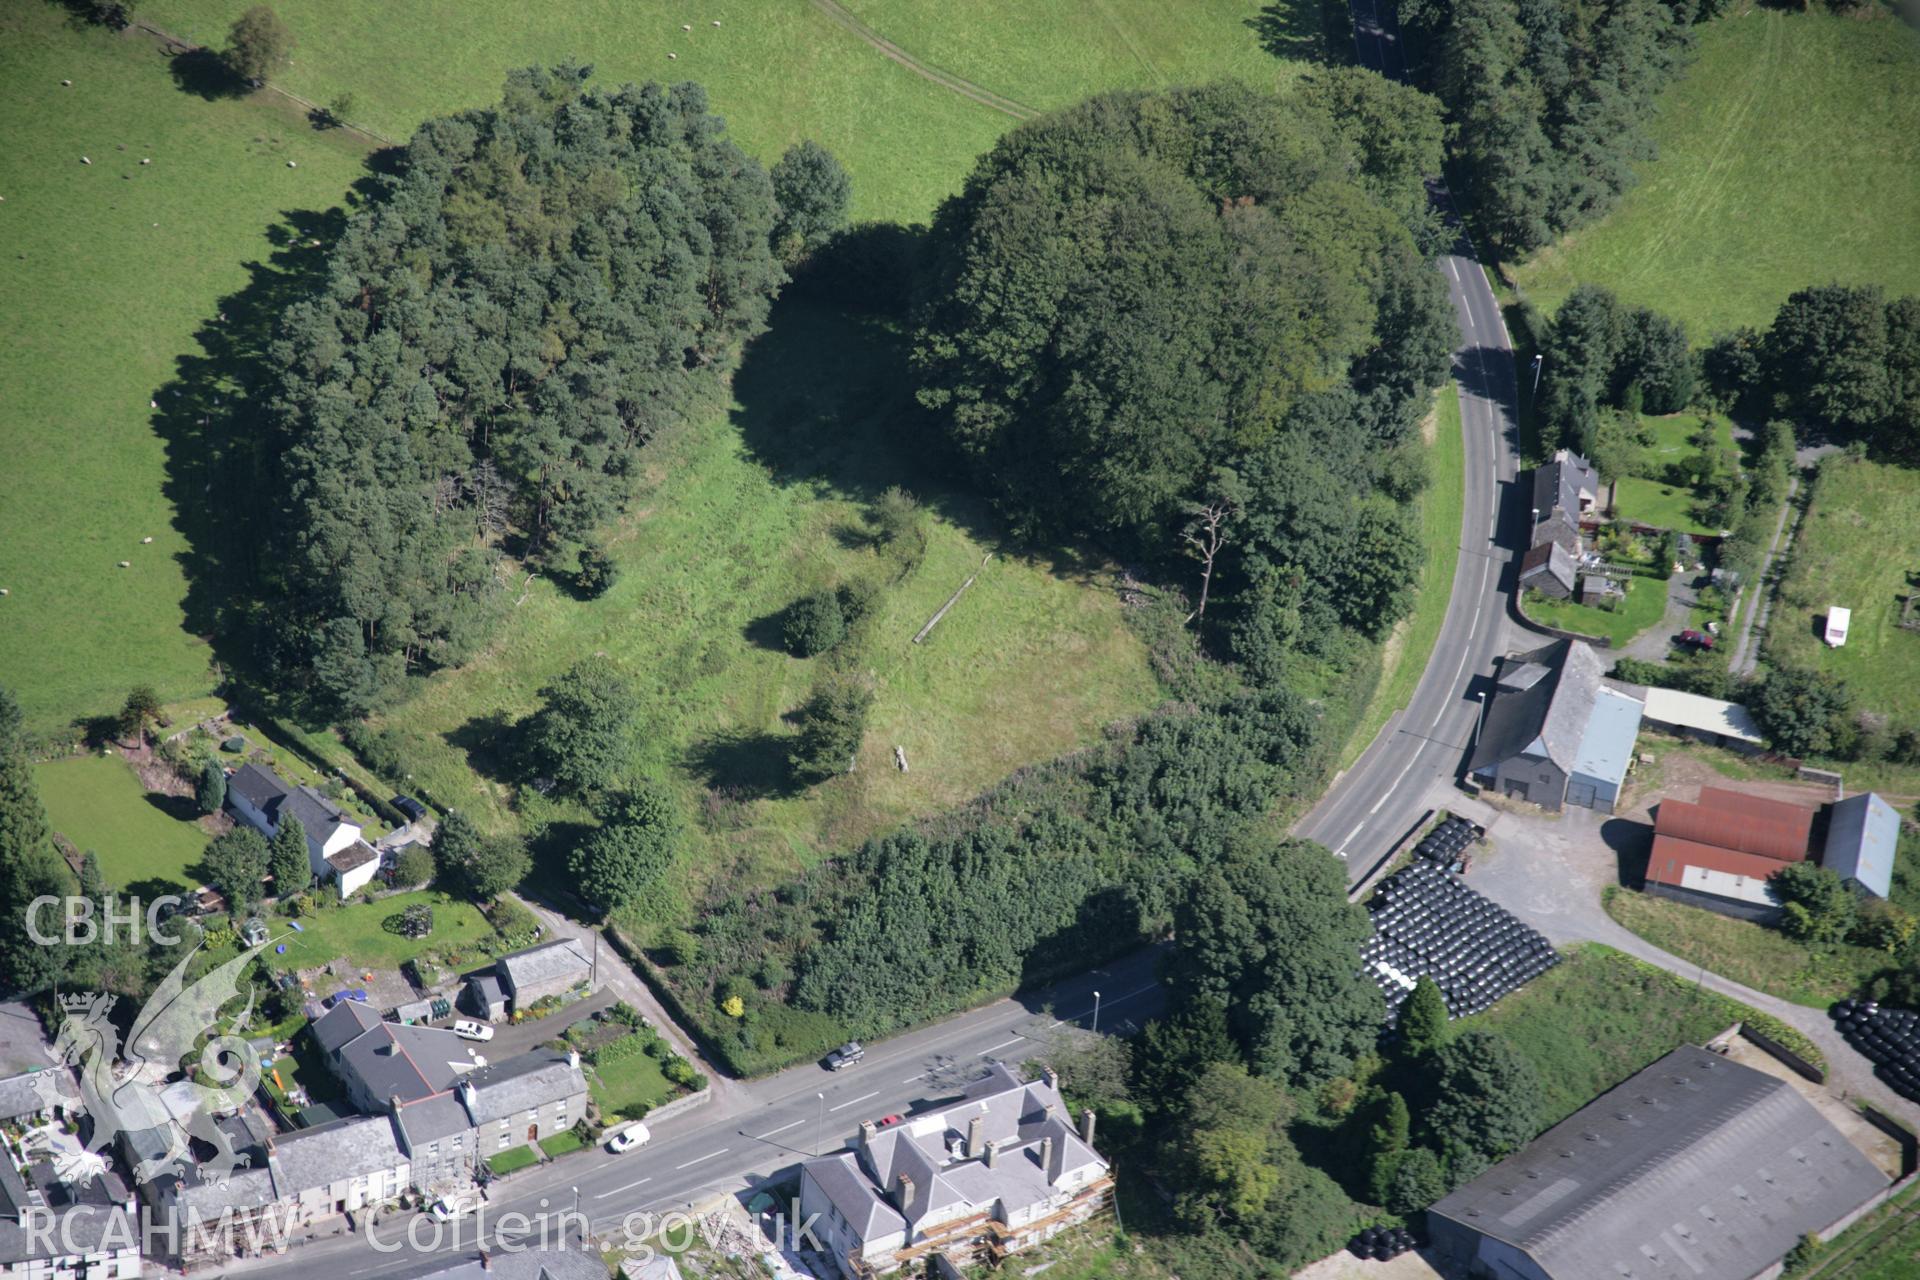 RCAHMW colour oblique aerial photograph of Trecastle Motte and the village from the south. Taken on 02 September 2005 by Toby Driver